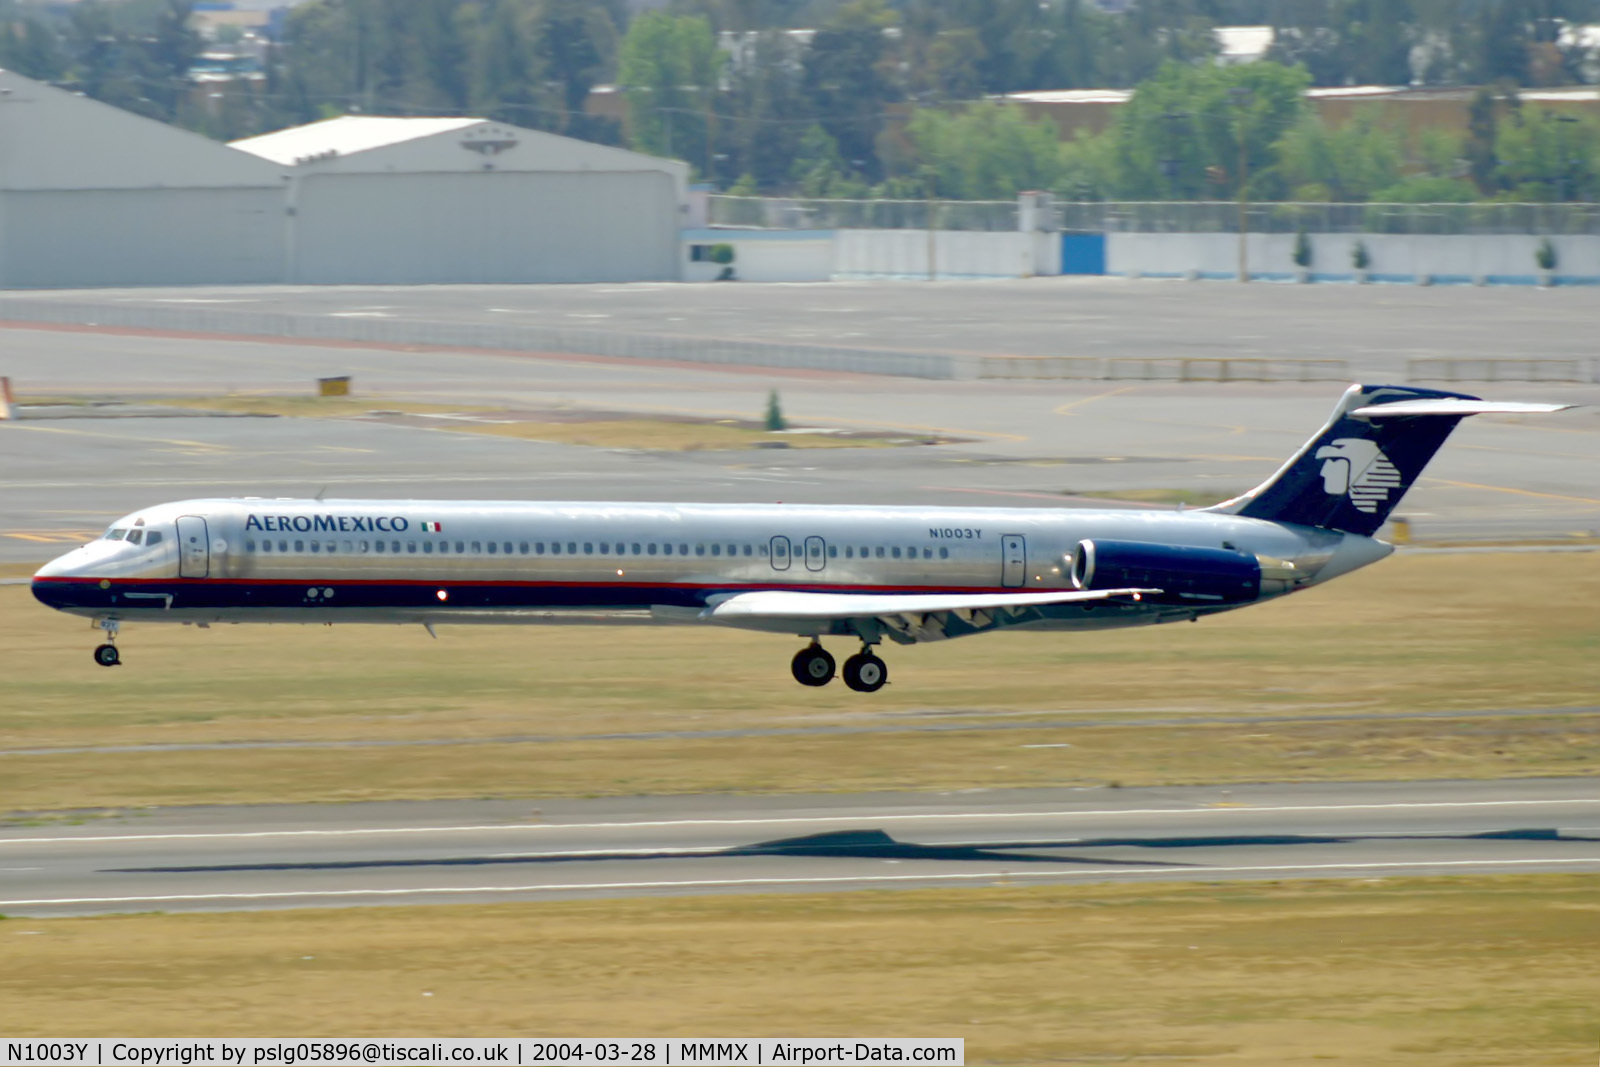 N1003Y, 1981 McDonnell Douglas MD-82 (DC-9-82) C/N 48068, Delivered to Aeromexico as N1003Y in 1981. Reregistered as XA-SFK in 1993 and back to N1003Y in 1995. Withdrawn from use at Goodyear, AZ in 2006 and scrapped.